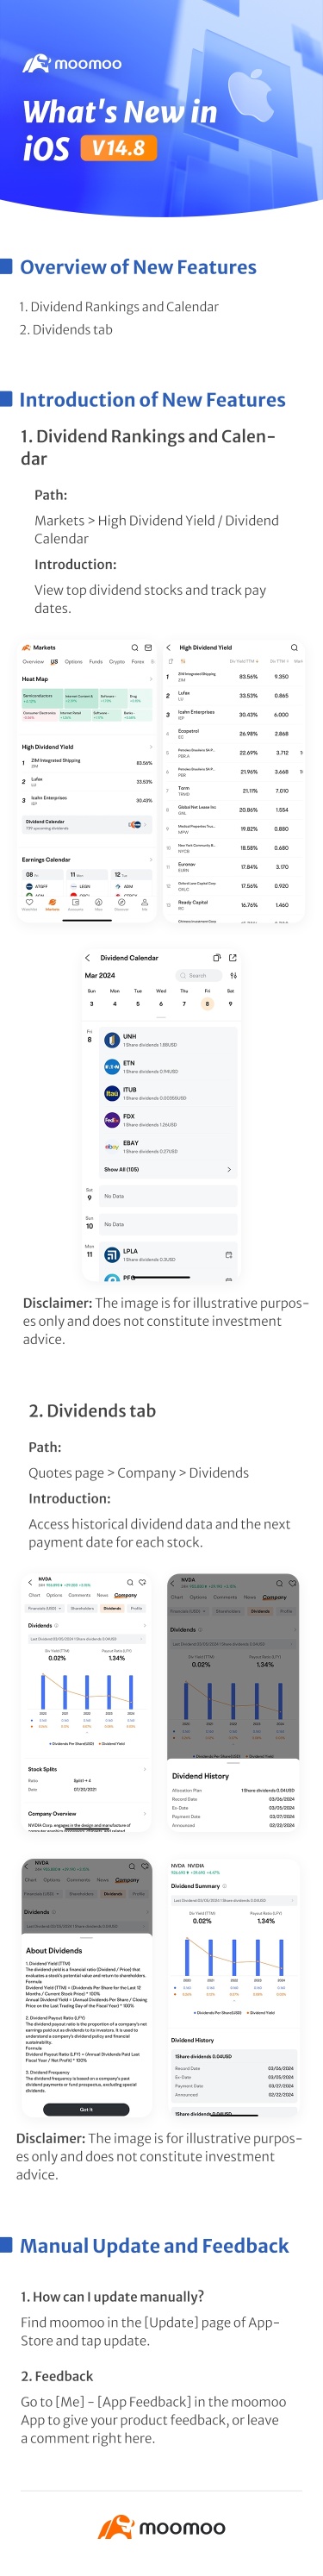 What's New: Dividend Rankings, Dividend Calendar and Dividends tab are available in iOS v14.8